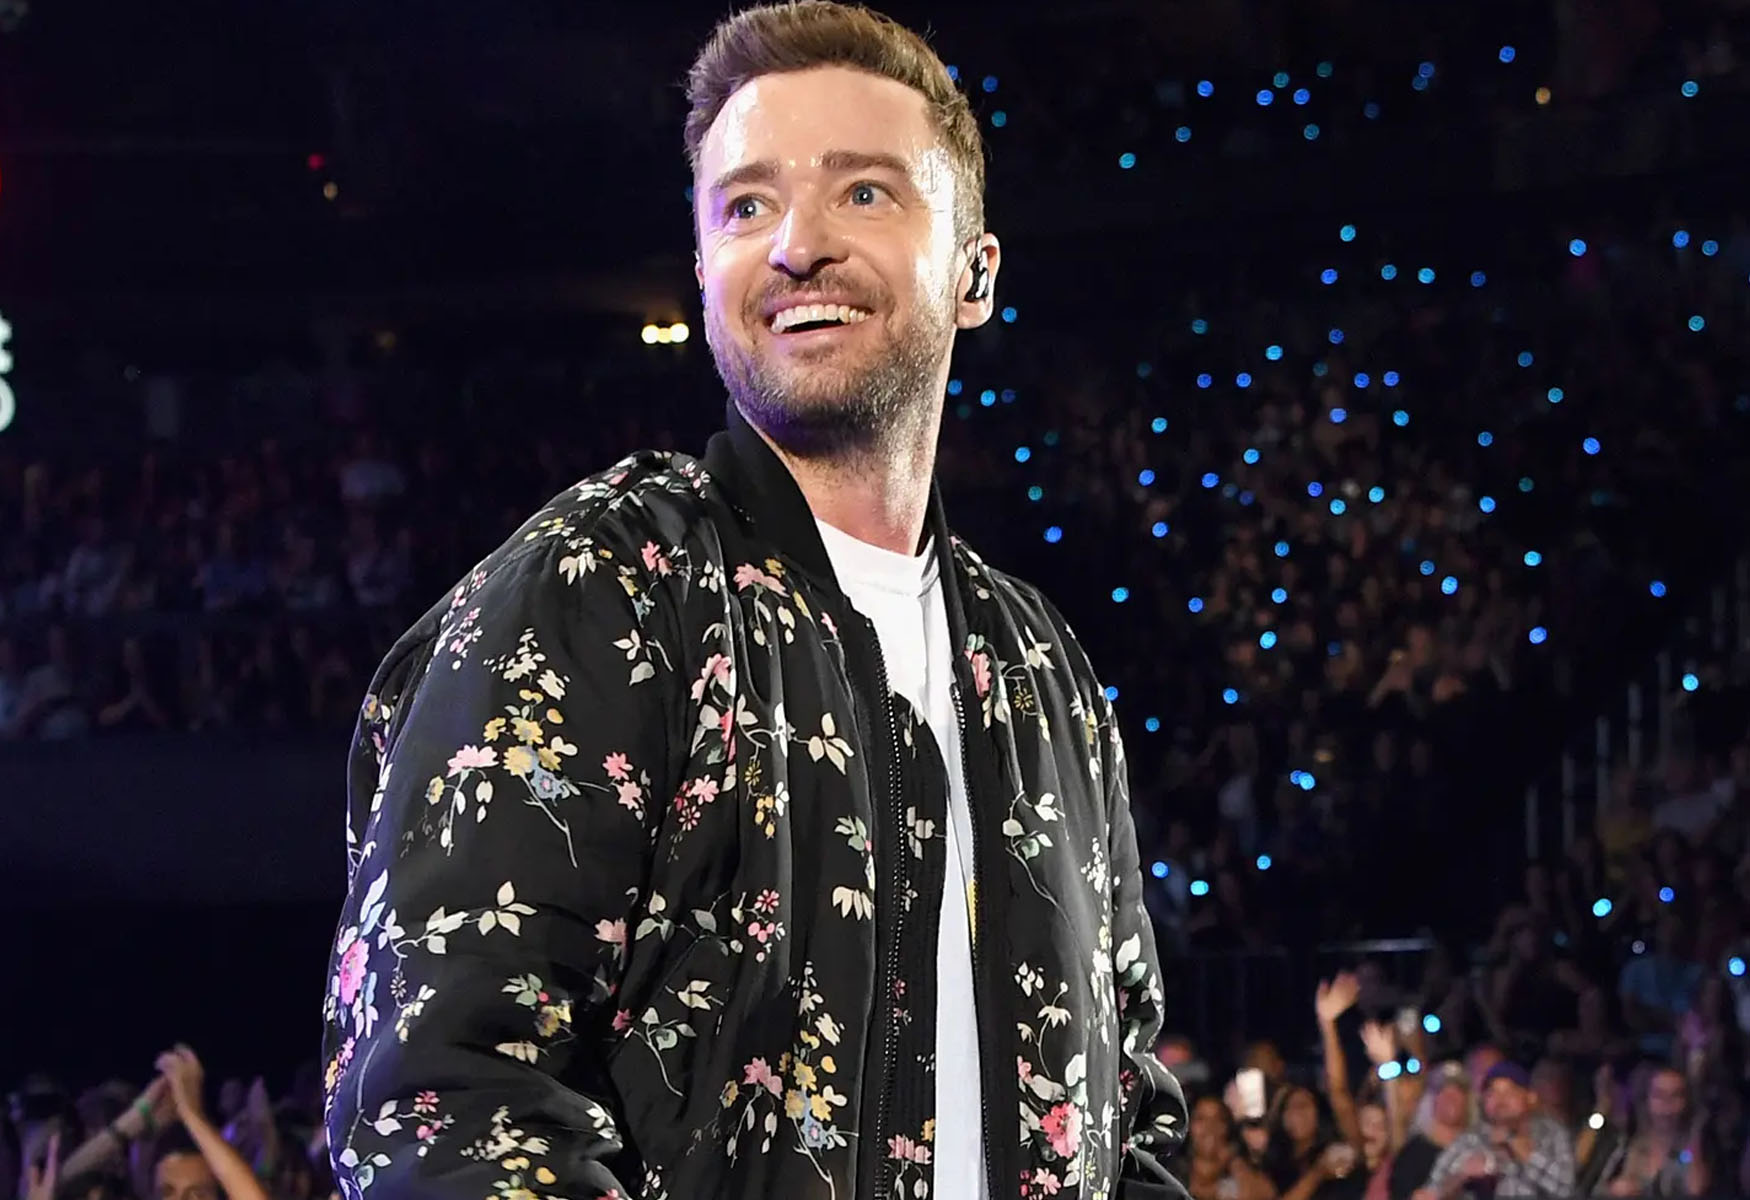 Justin Timberlake Lights Up Fontainebleau Las Vegas With Dazzling Performance